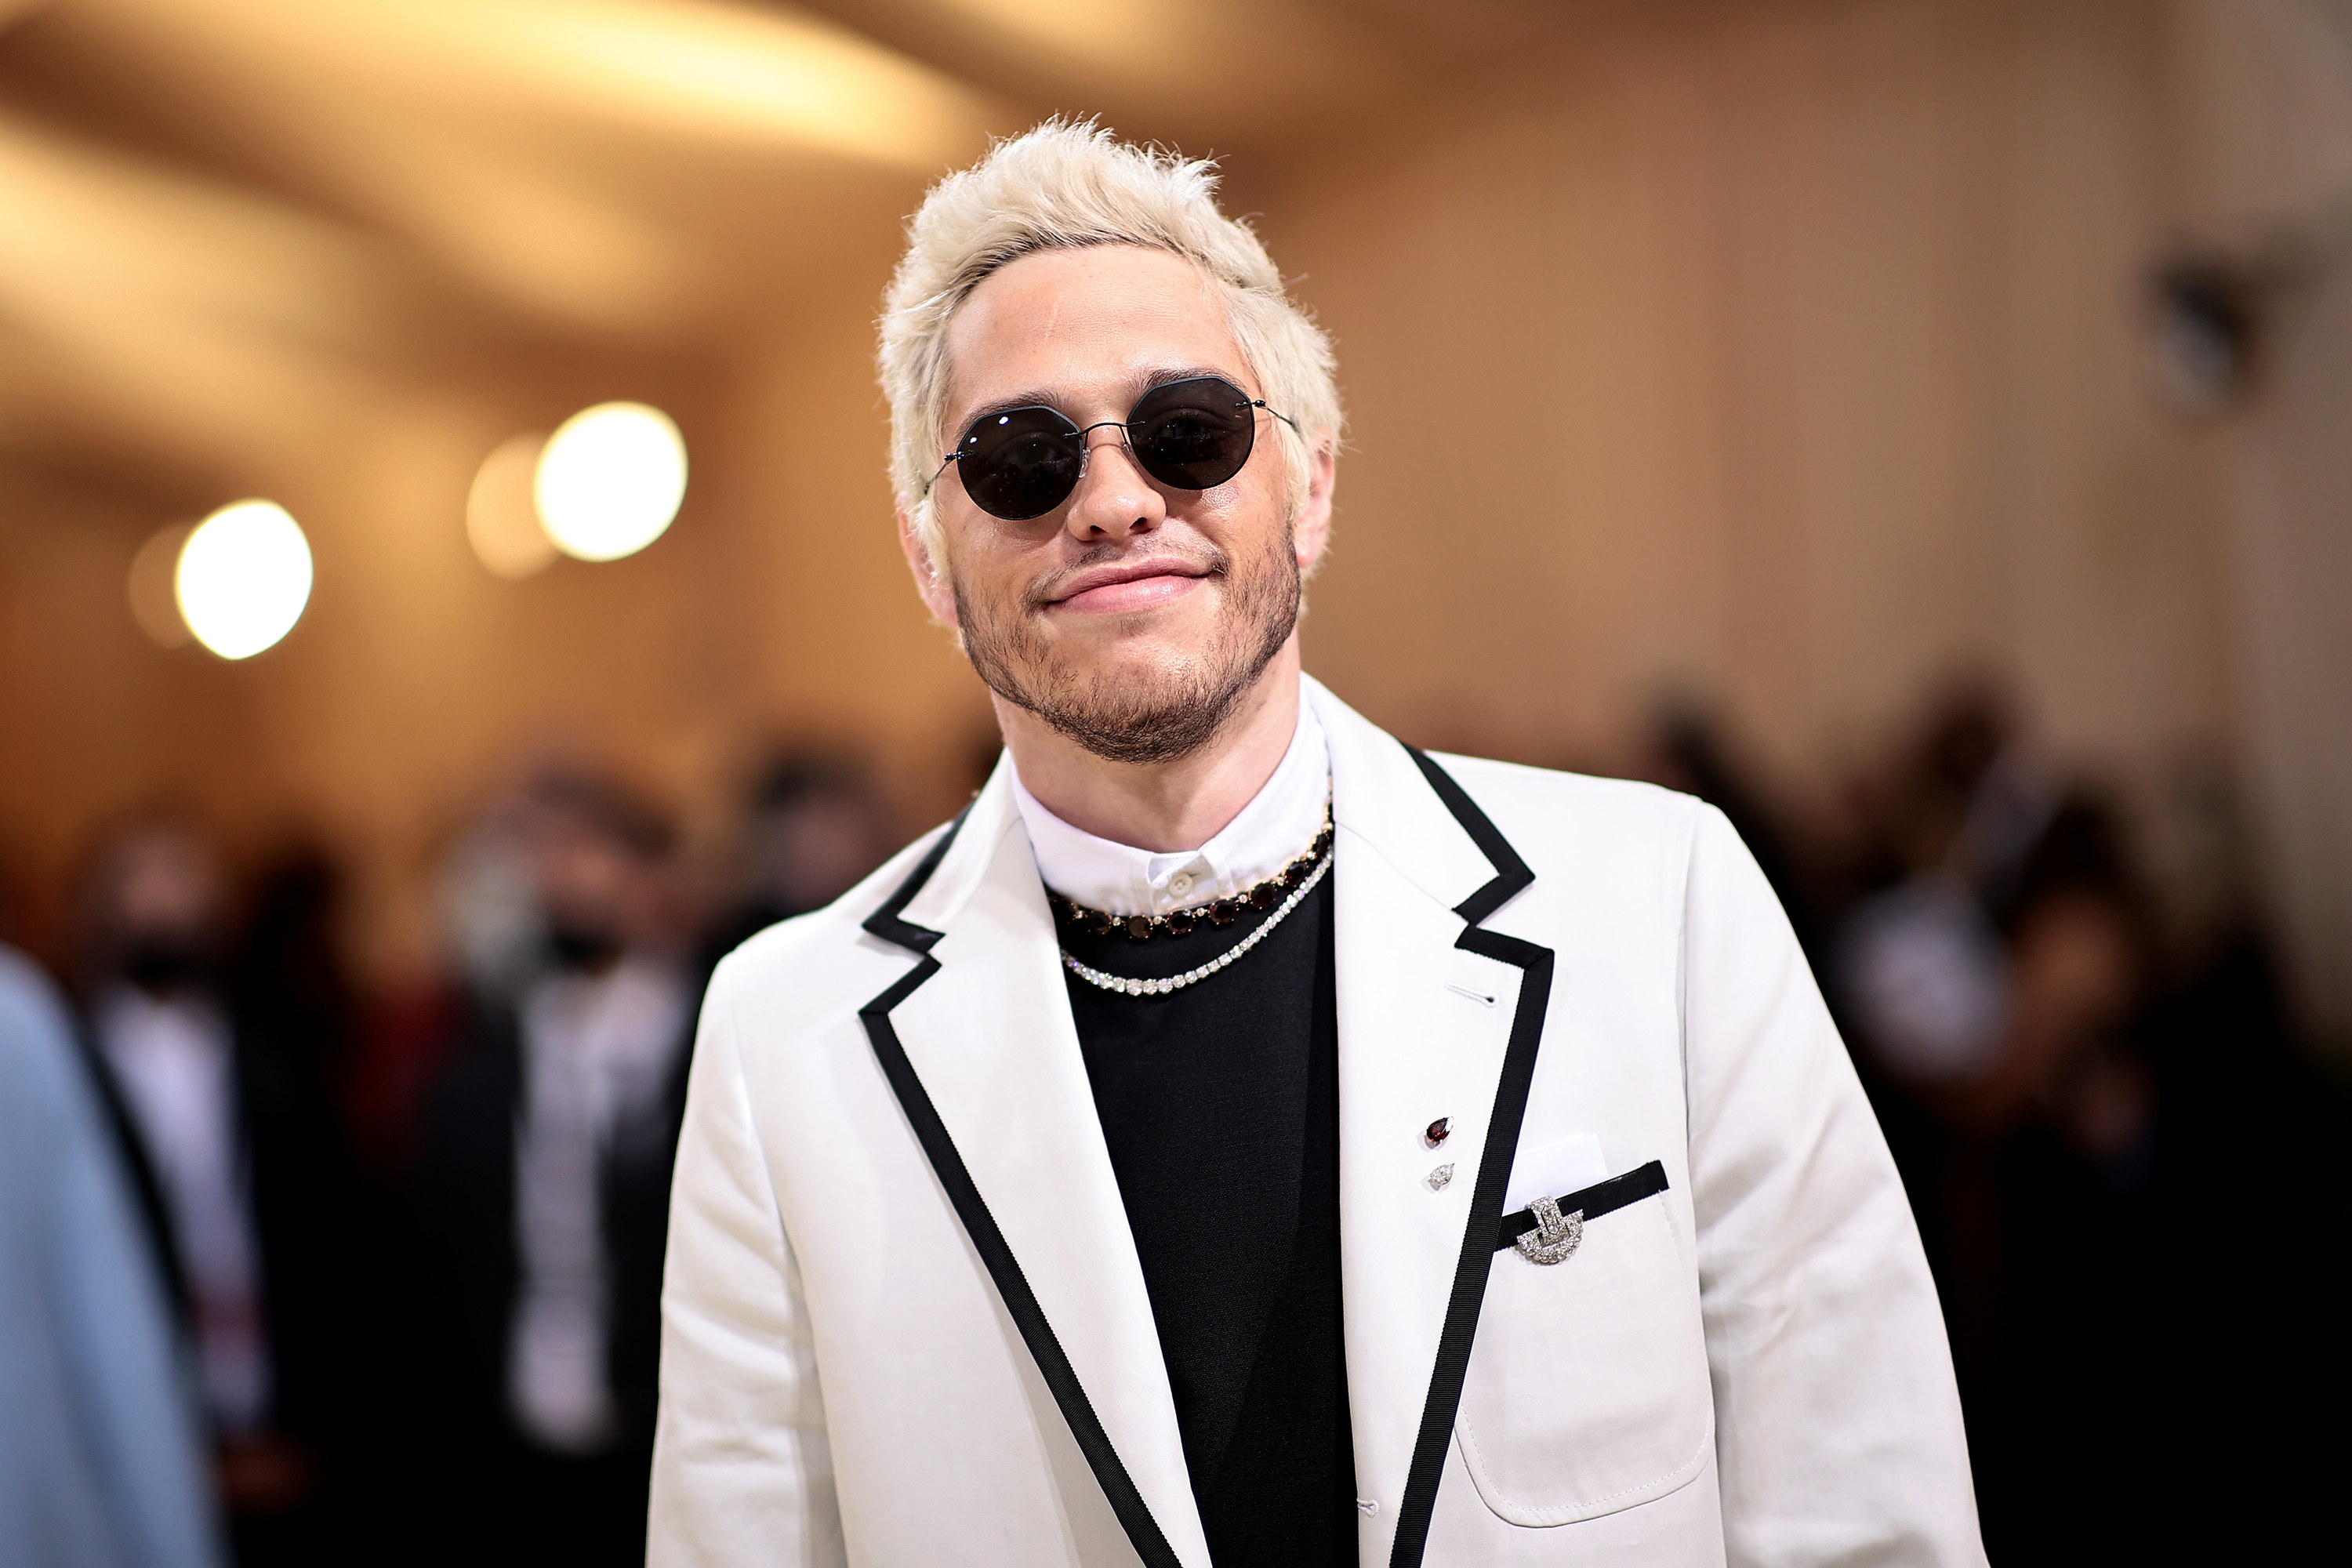 Pete Davidson attends The 2021 Met Gala Celebrating In America: A Lexicon Of Fashion at Metropolitan Museum of Art on September 13, 2021